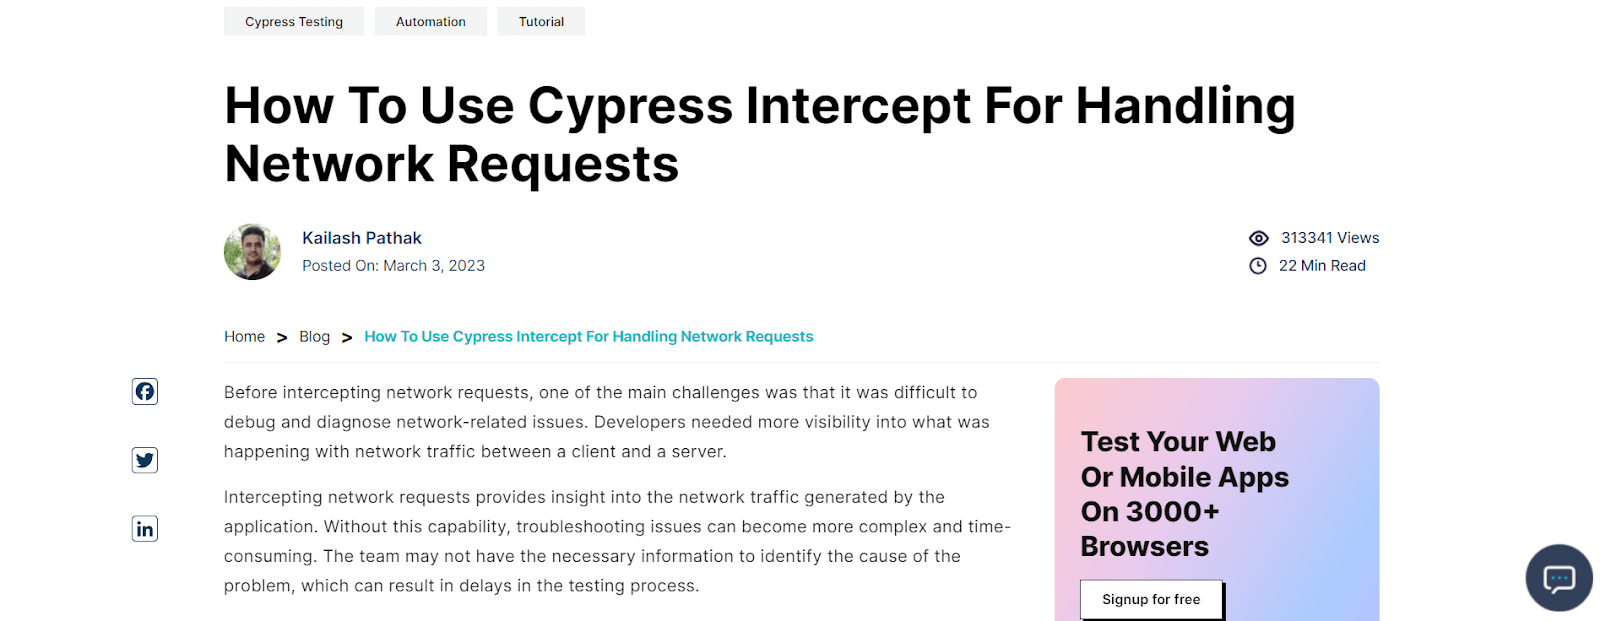 Use Cypress Intercept For Handling Network Requests